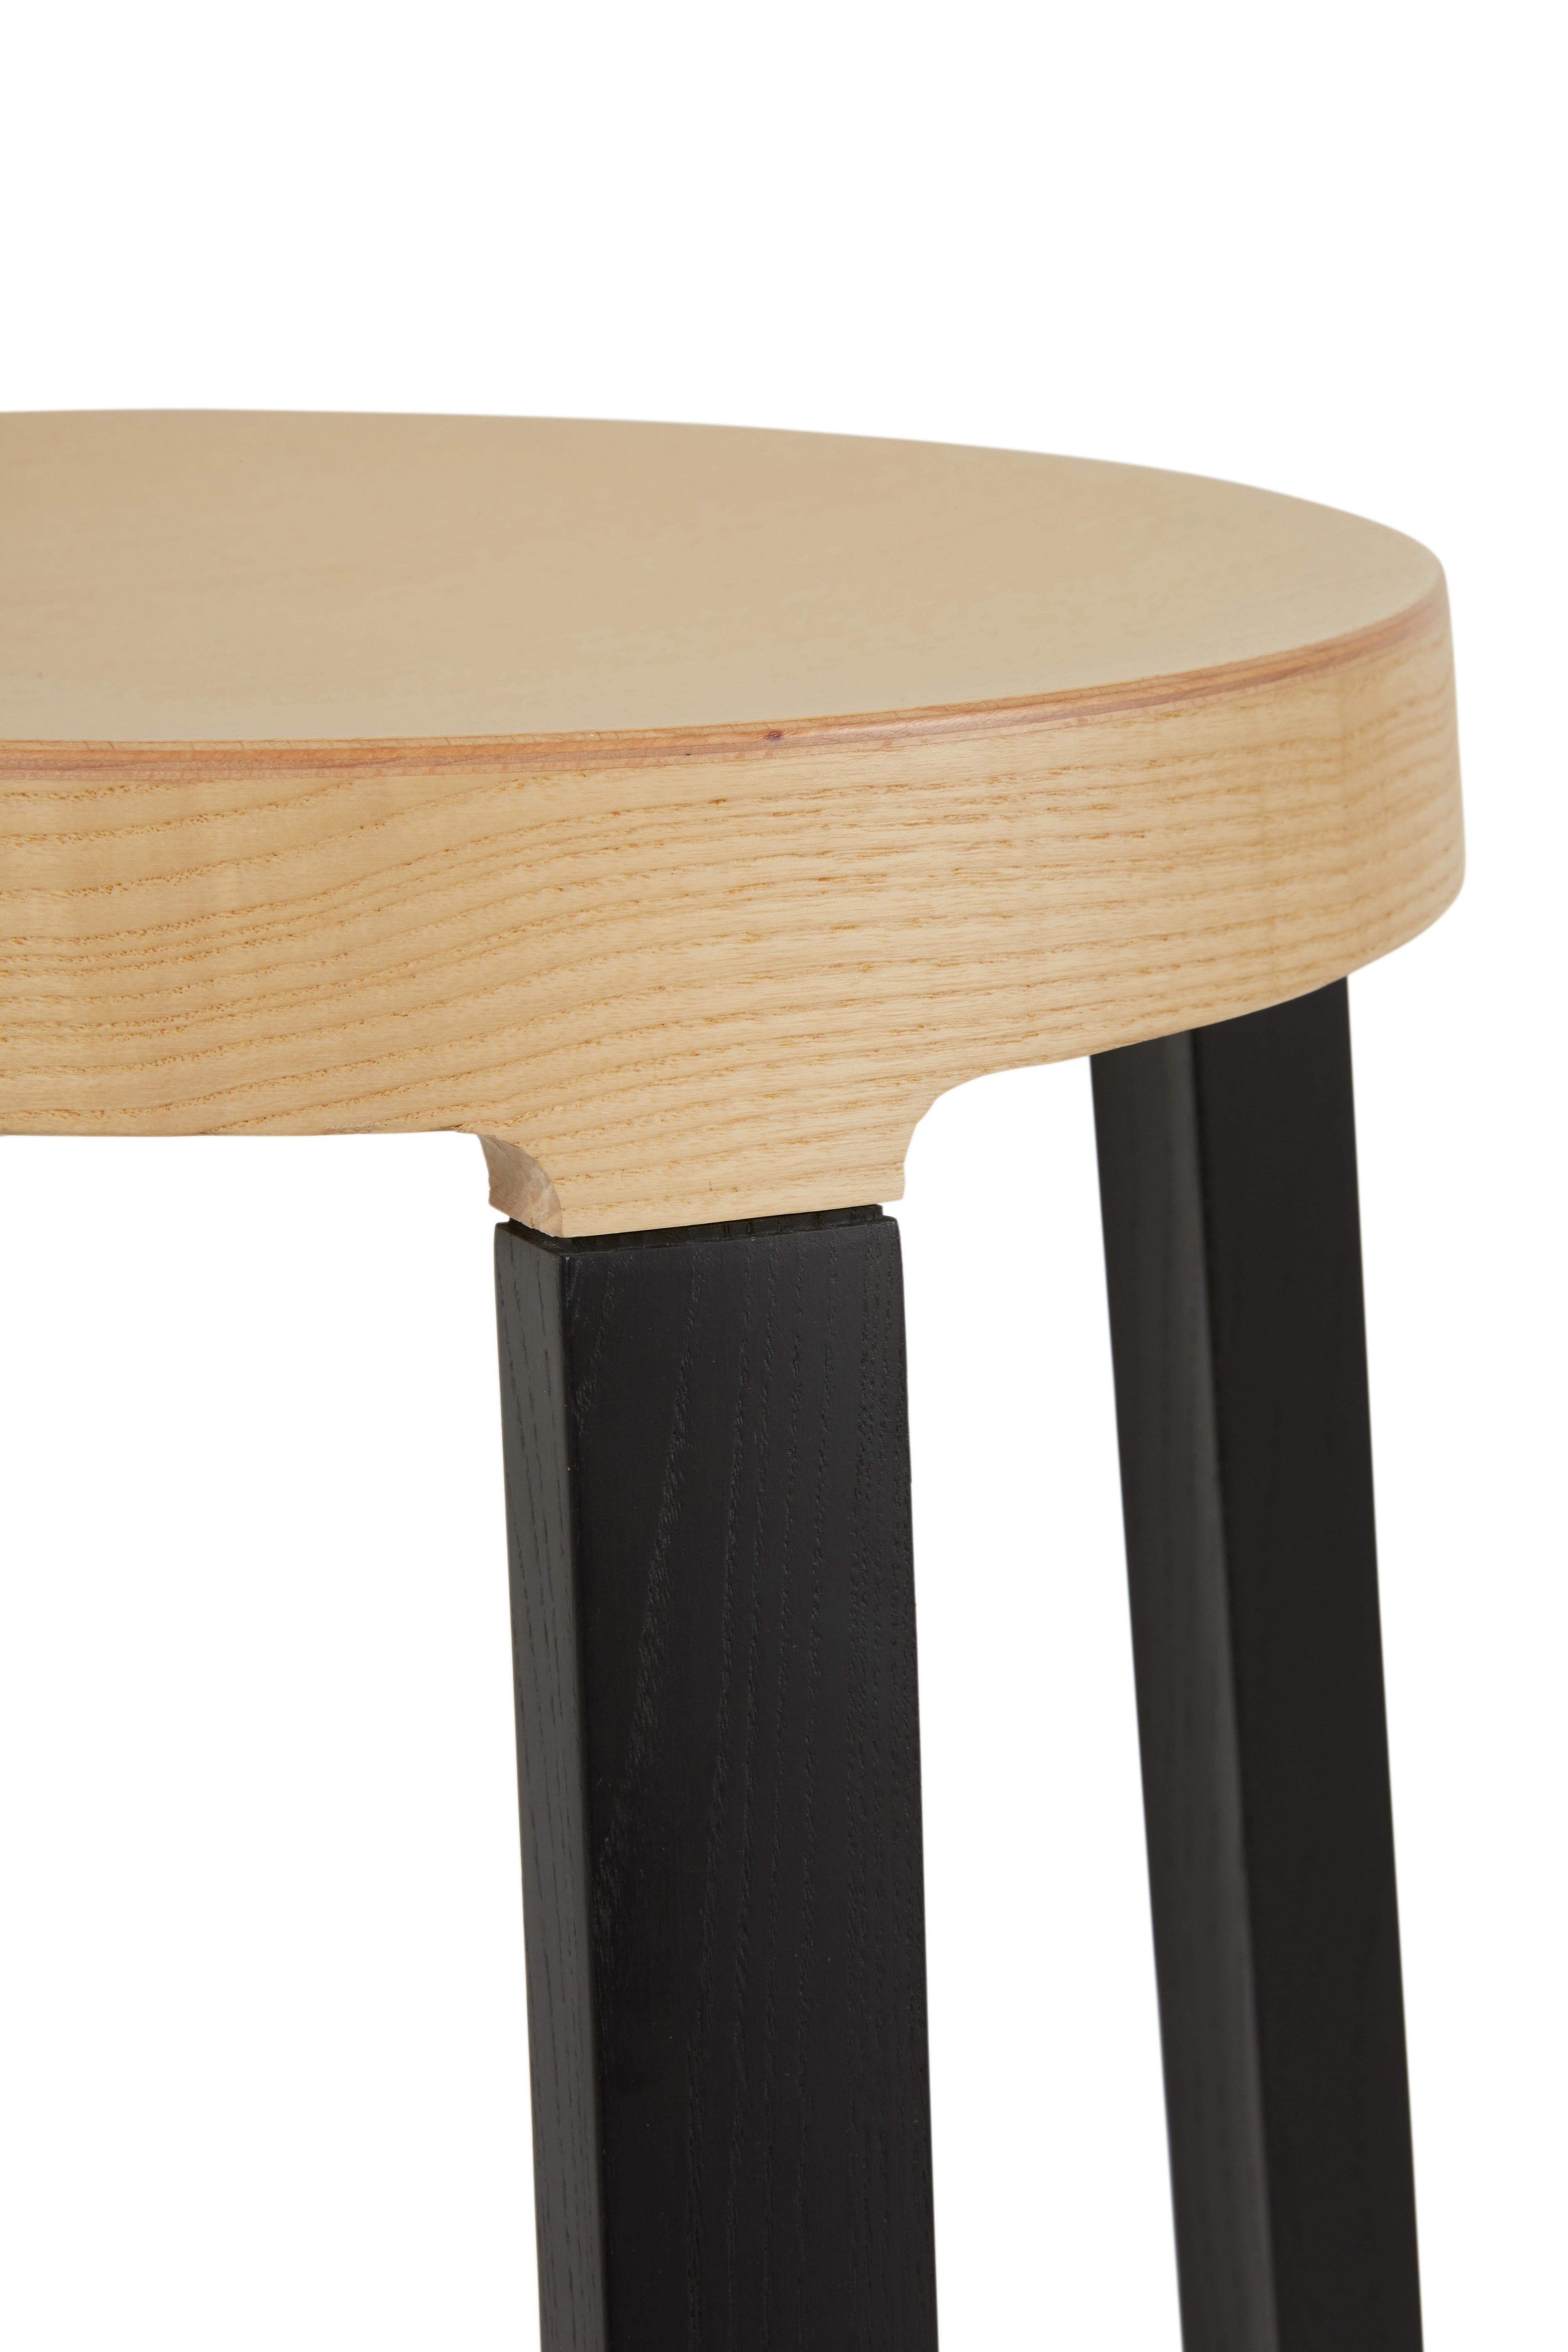 The delightful and charming Step is a solid ash stool made with a high-tech process. This reliable little stool has a strong typology and colorful character that will suit modern, light-filled kitchens, bars and studios.

Also available in tall